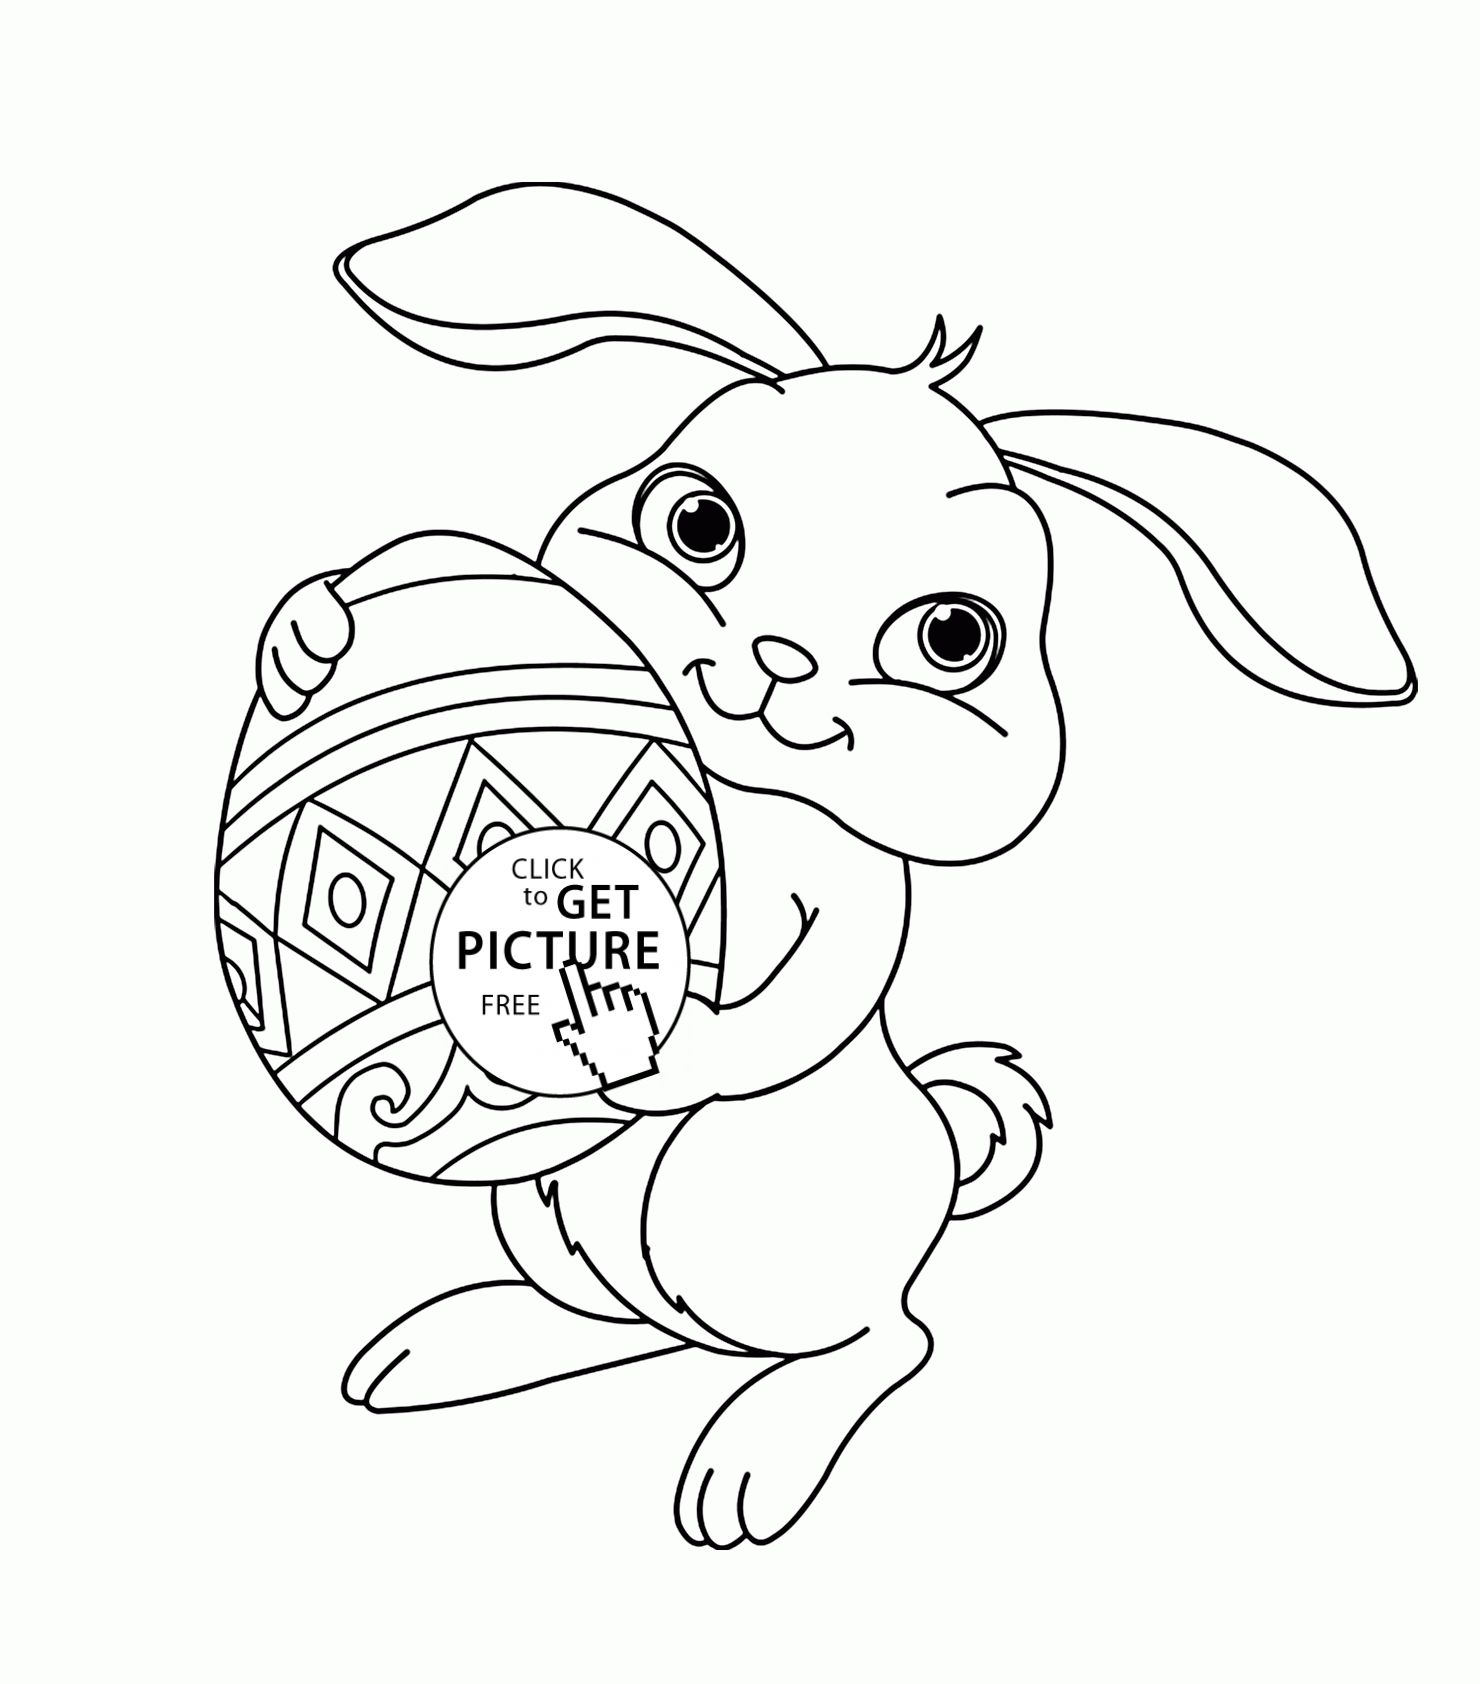 Cute Bunny Coloring Pages To Print - Coloring Home